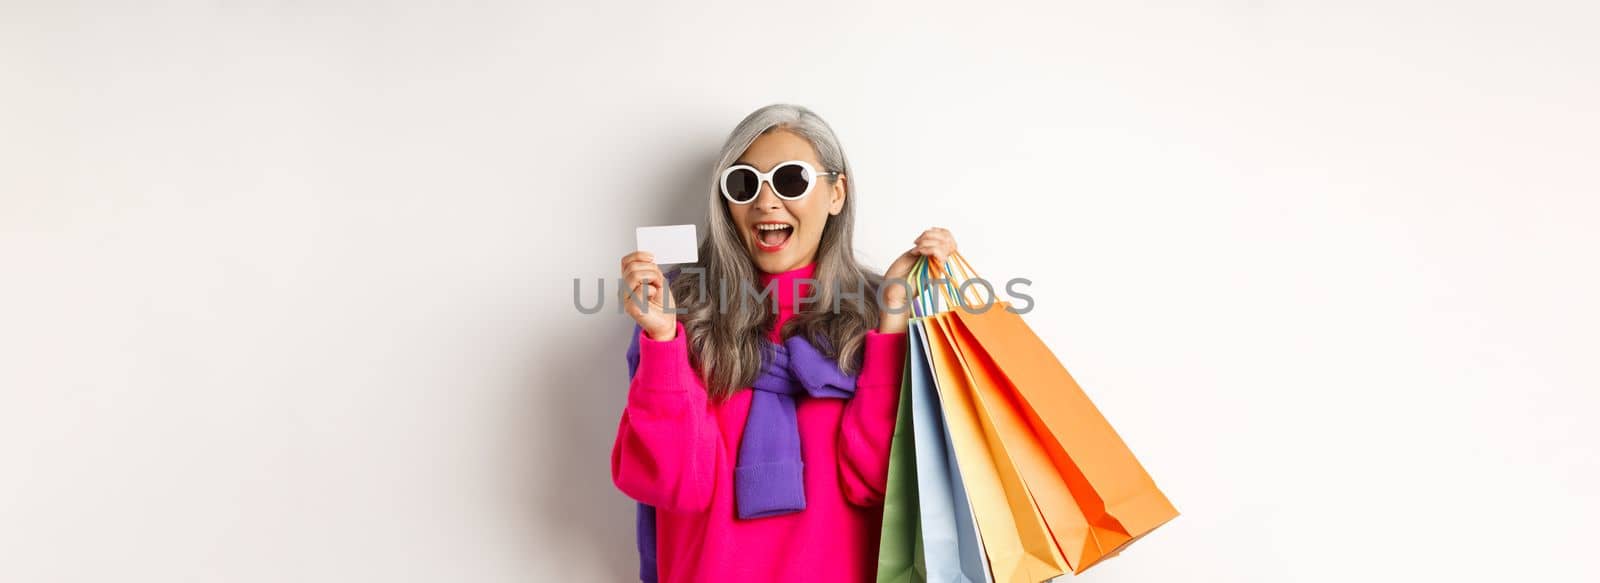 Stylish asian grandmother in sunglasses going shopping on holiday sale, holding paper bags and plastic credit card, standing over white background.